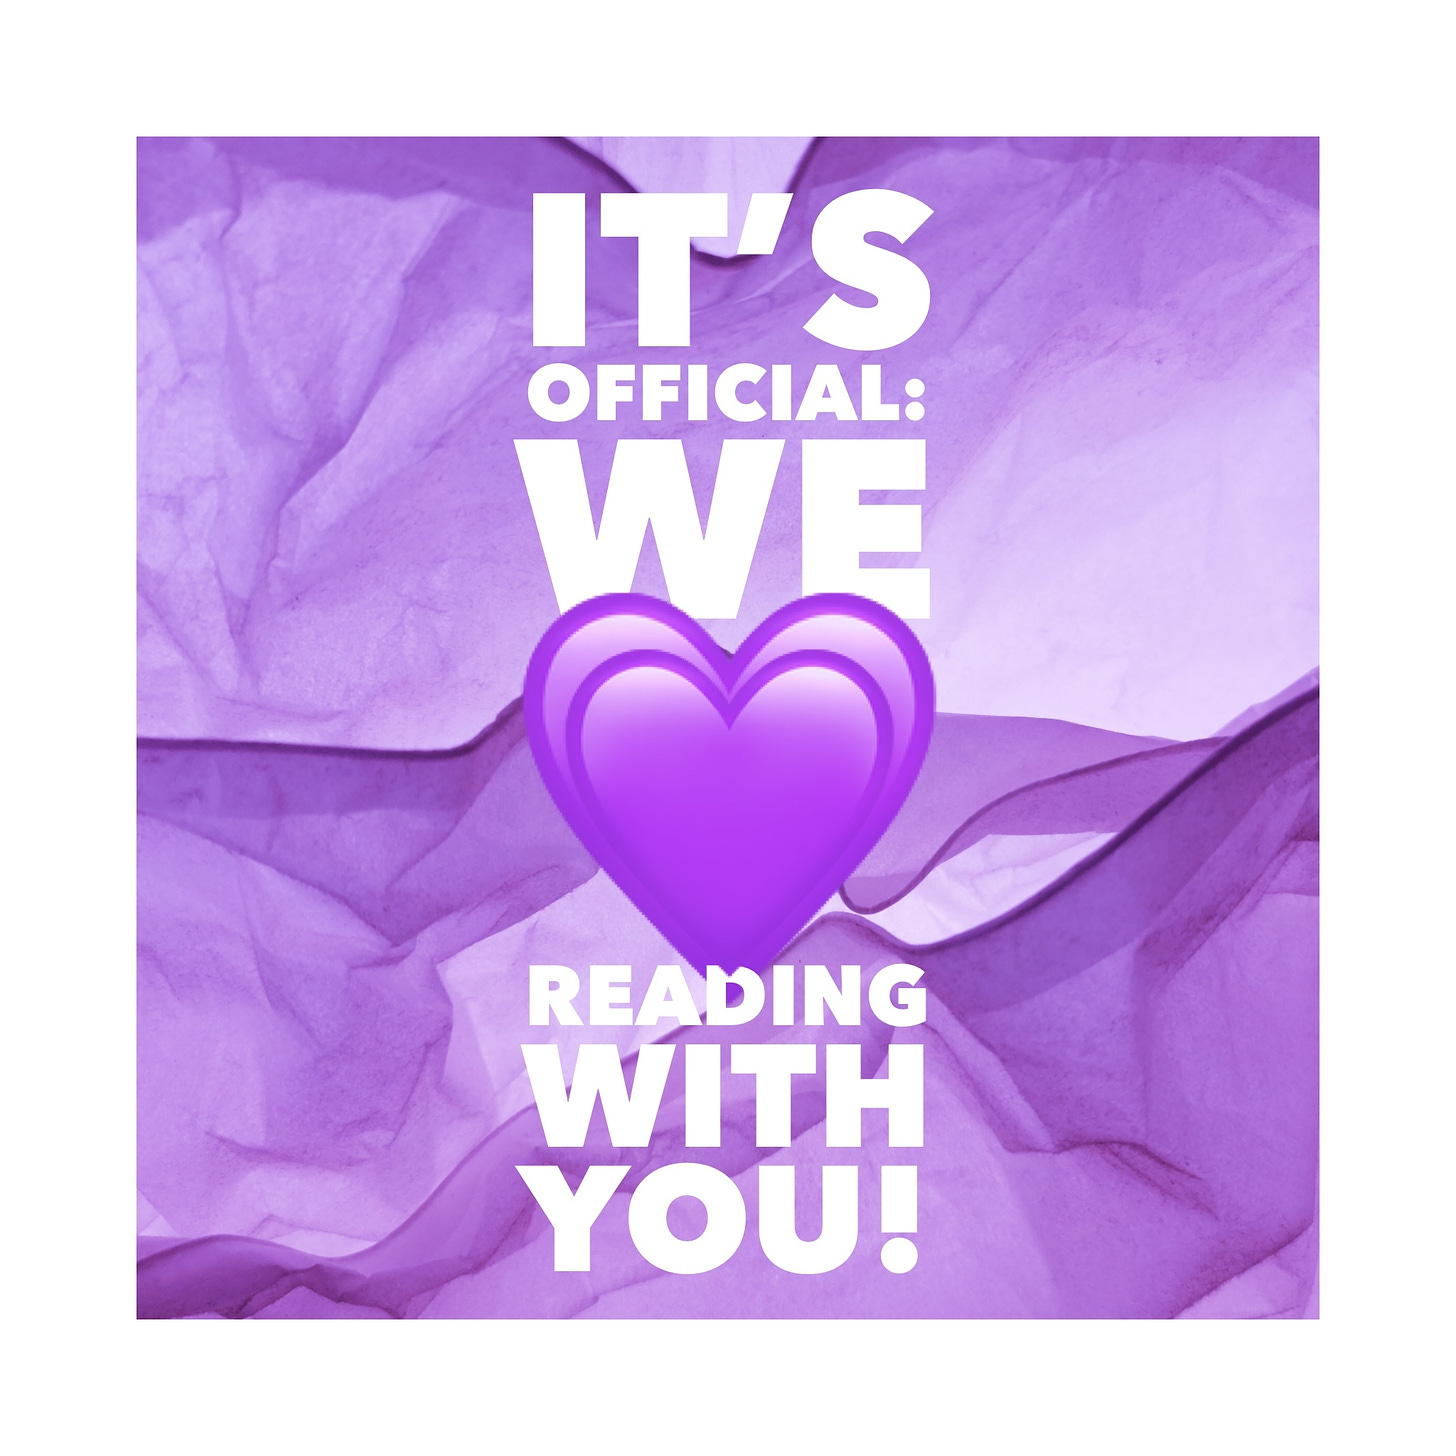 The words "It's Official: We Love Reading With you!" Over purple tissue paper with a purple heart emoji standing in for love